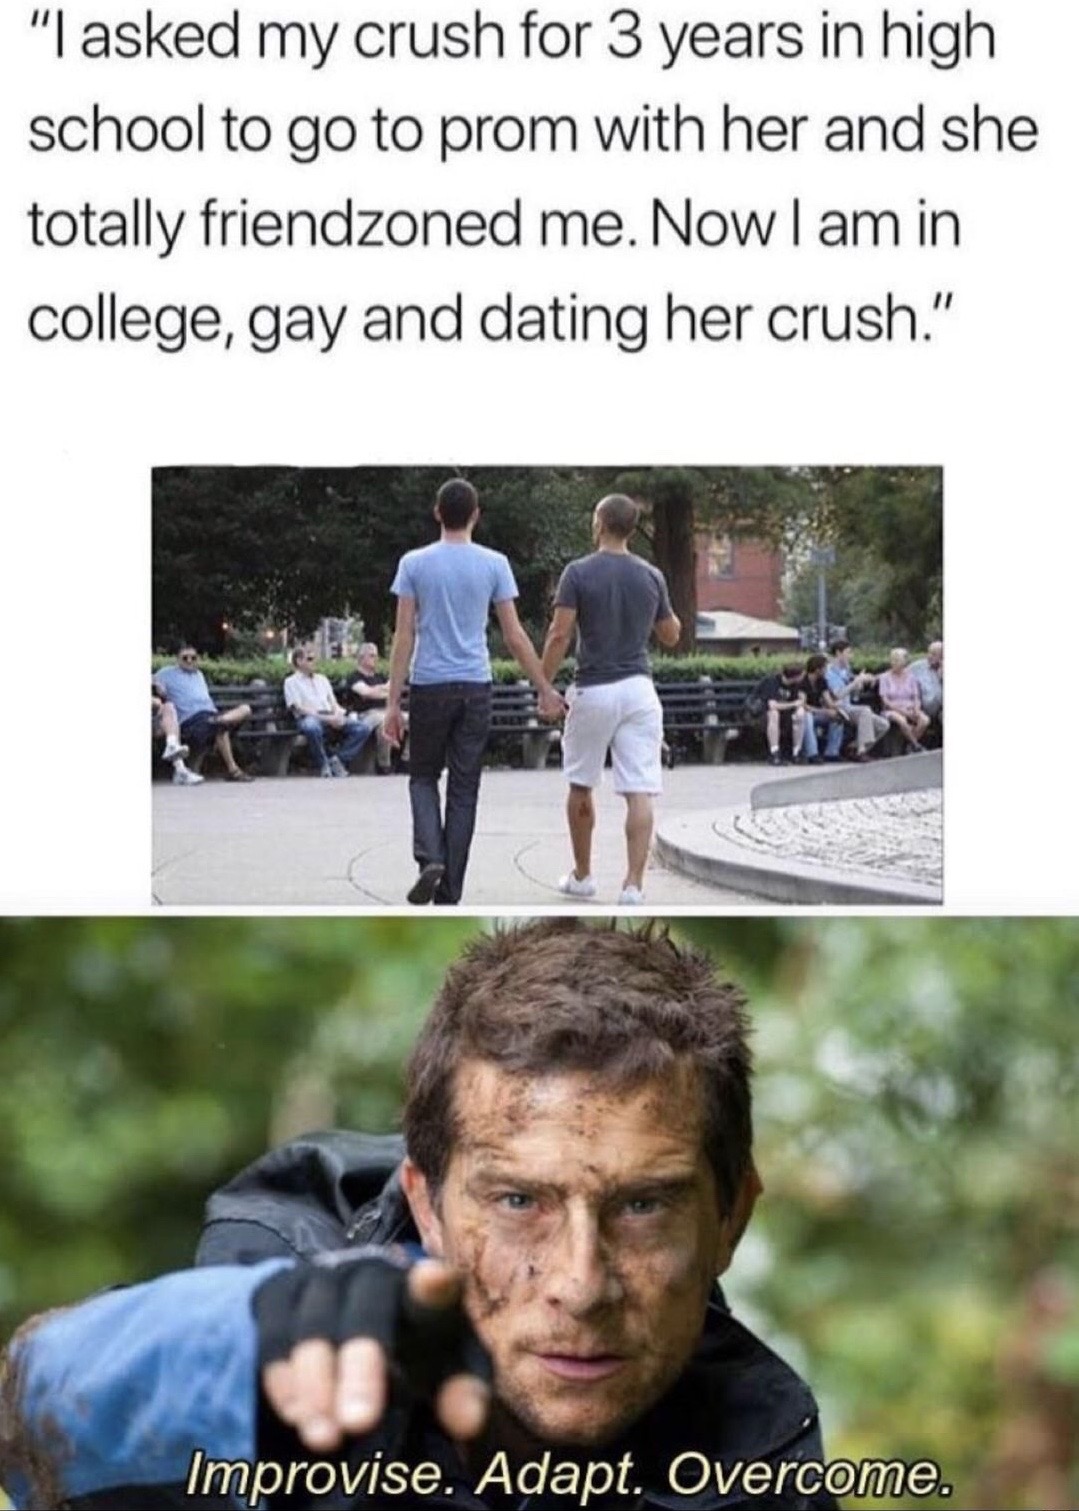 improvise adapt overcome meme blank - "I asked my crush for 3 years in high school to go to prom with her and she totally friendzoned me. Now I am in college, gay and dating her crush." Improvise. Adapt. Overcome.